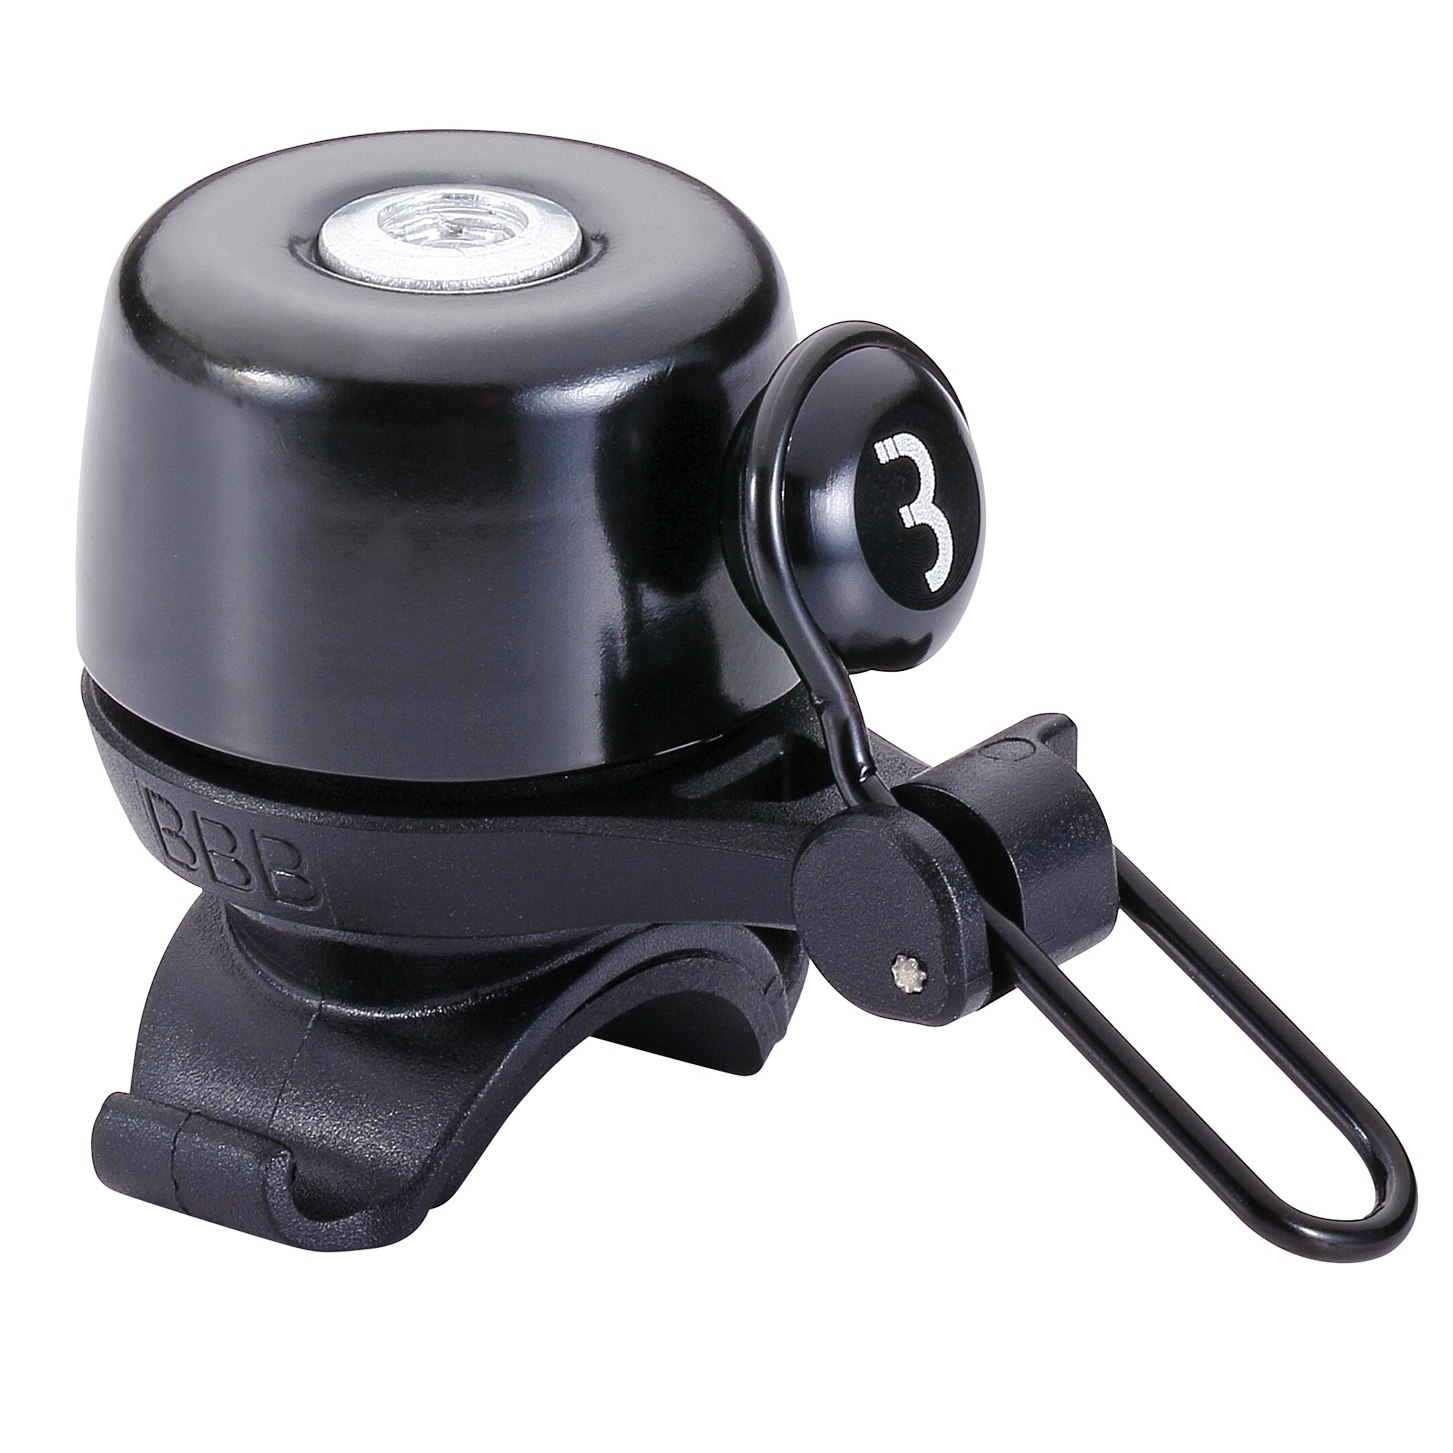 Image of BBB Cycling Noisy Brass BBB-17 Bell - black